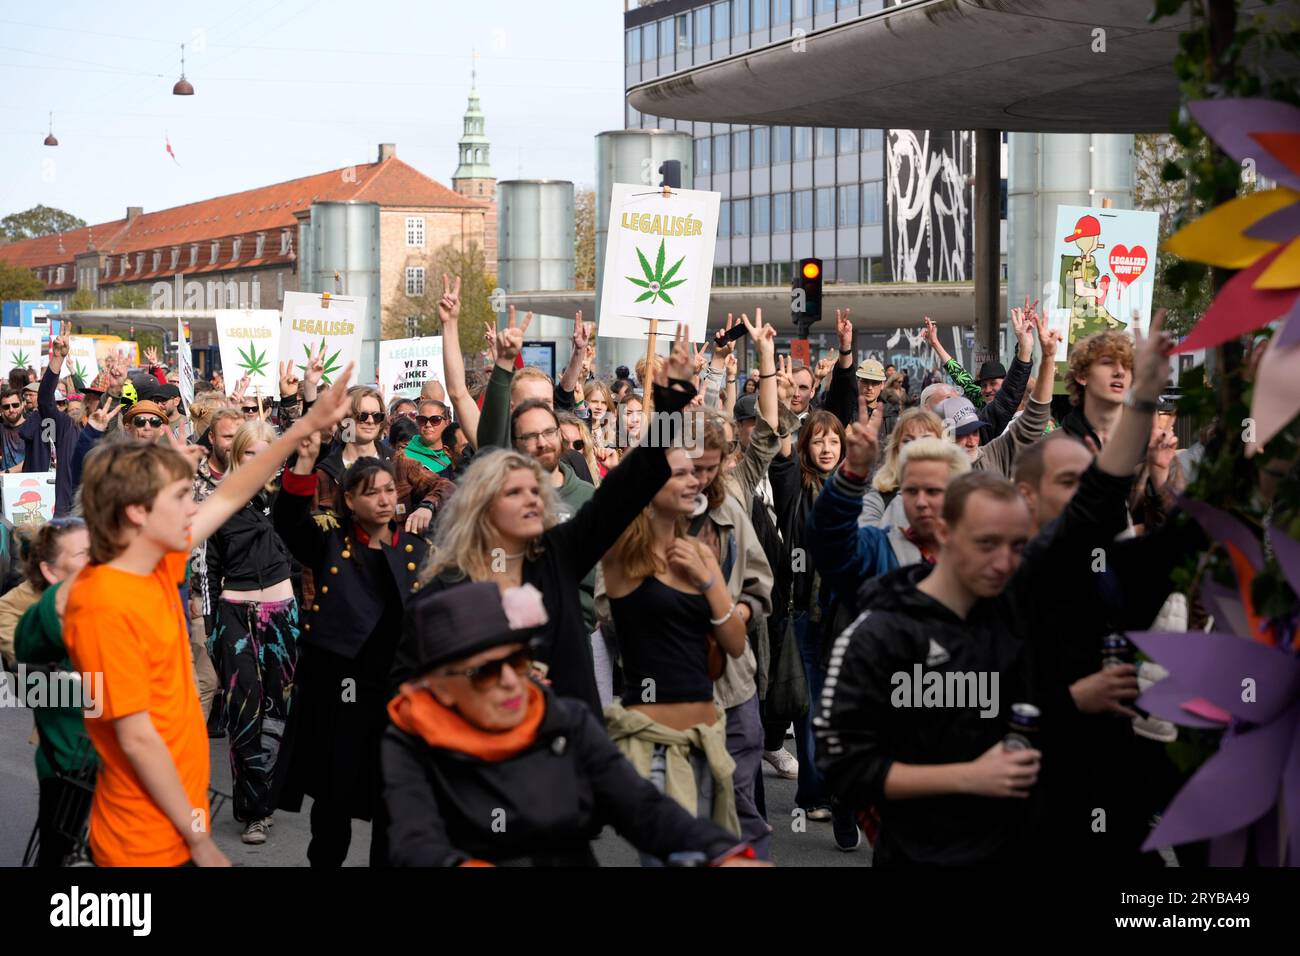 Demonstration for the legalization of cannabis in Copenhagen, Saturday 30 September 2023. The demonstration goes from Christiania to Christiansborg Castle Square. Freetown Christiania in Copenhagen is known for its cannabis-friendly culture and free-spirited residents. Christiania is considered to be the fourth largest tourist attraction in Copenhagen, with half a million visitors annually. (Photo: Emil Helms/Scanpix 2023) Stock Photo